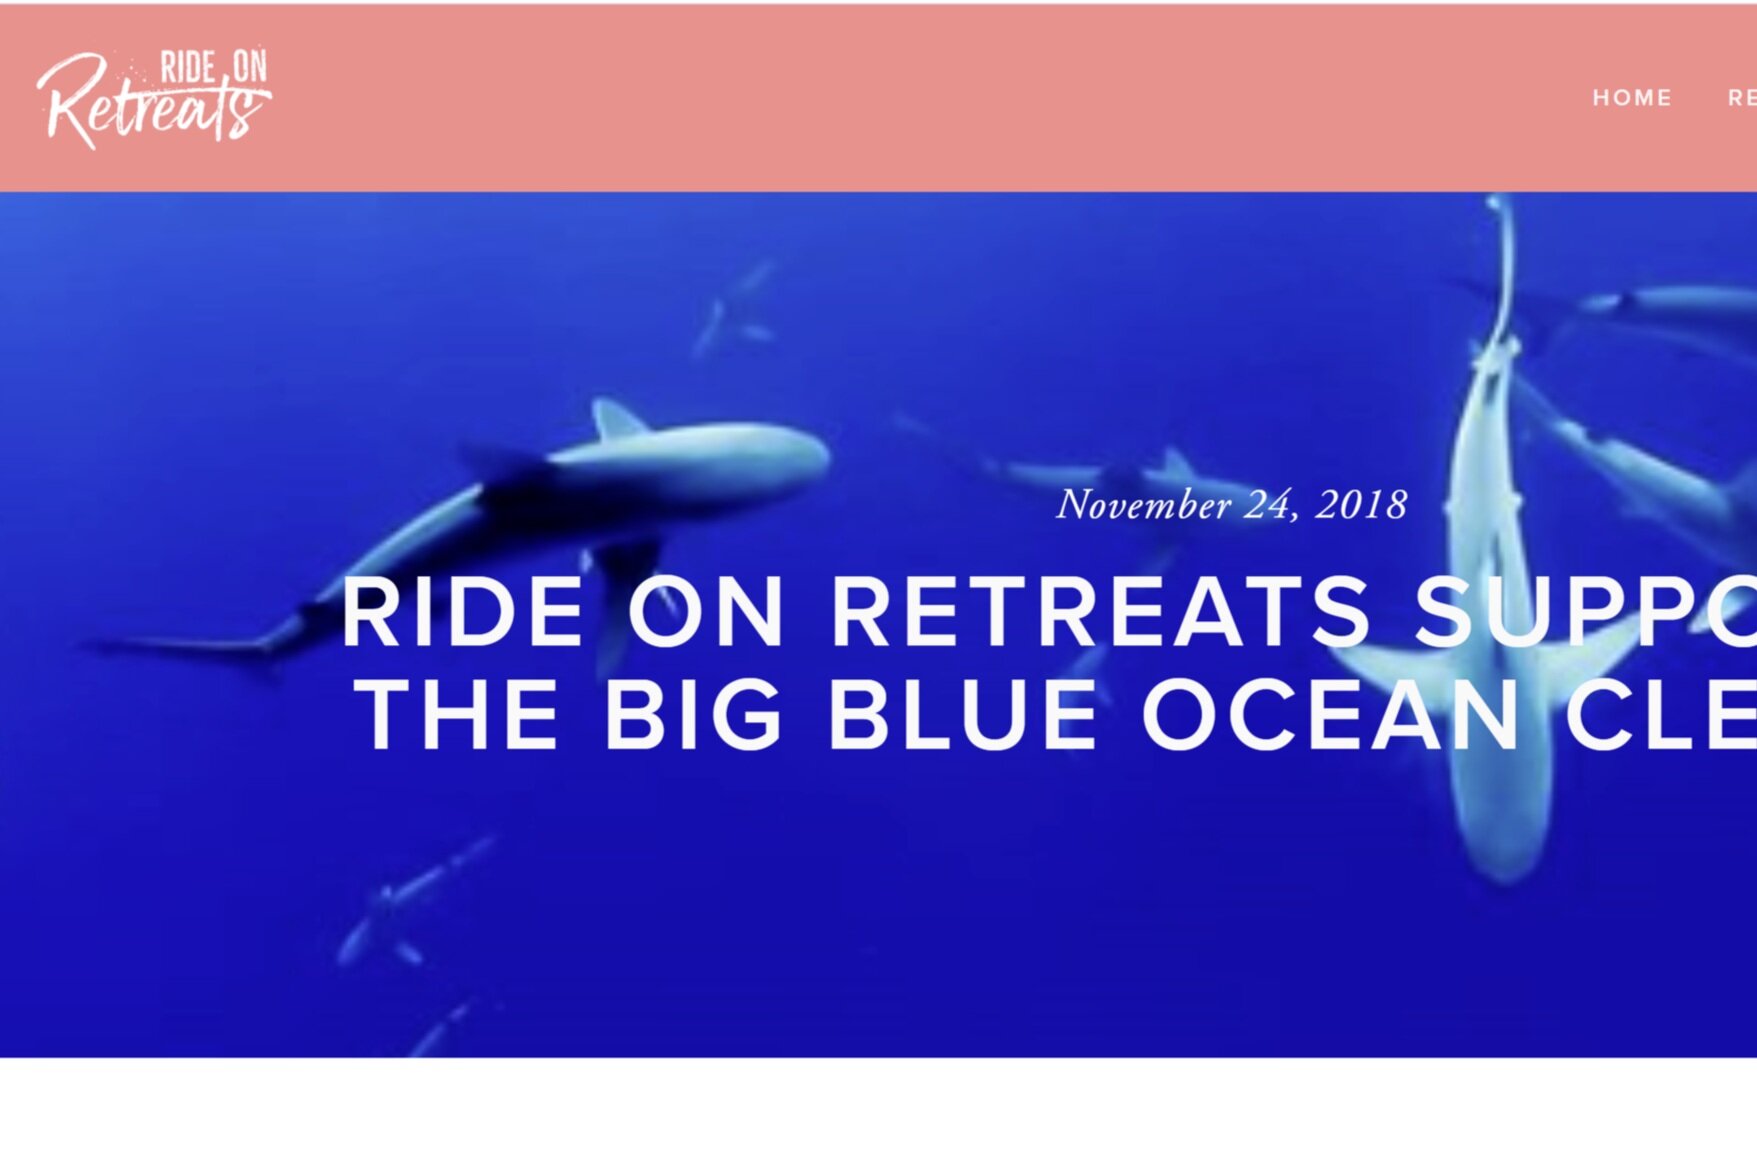 Ride+on+Retreats+supporting+the+Big+Blue+Ocean+Cleanup%21+%E2%80%94+Ride+on+Retreats+-+Google+Chrome+03_05_2020+14_46_10.jpg